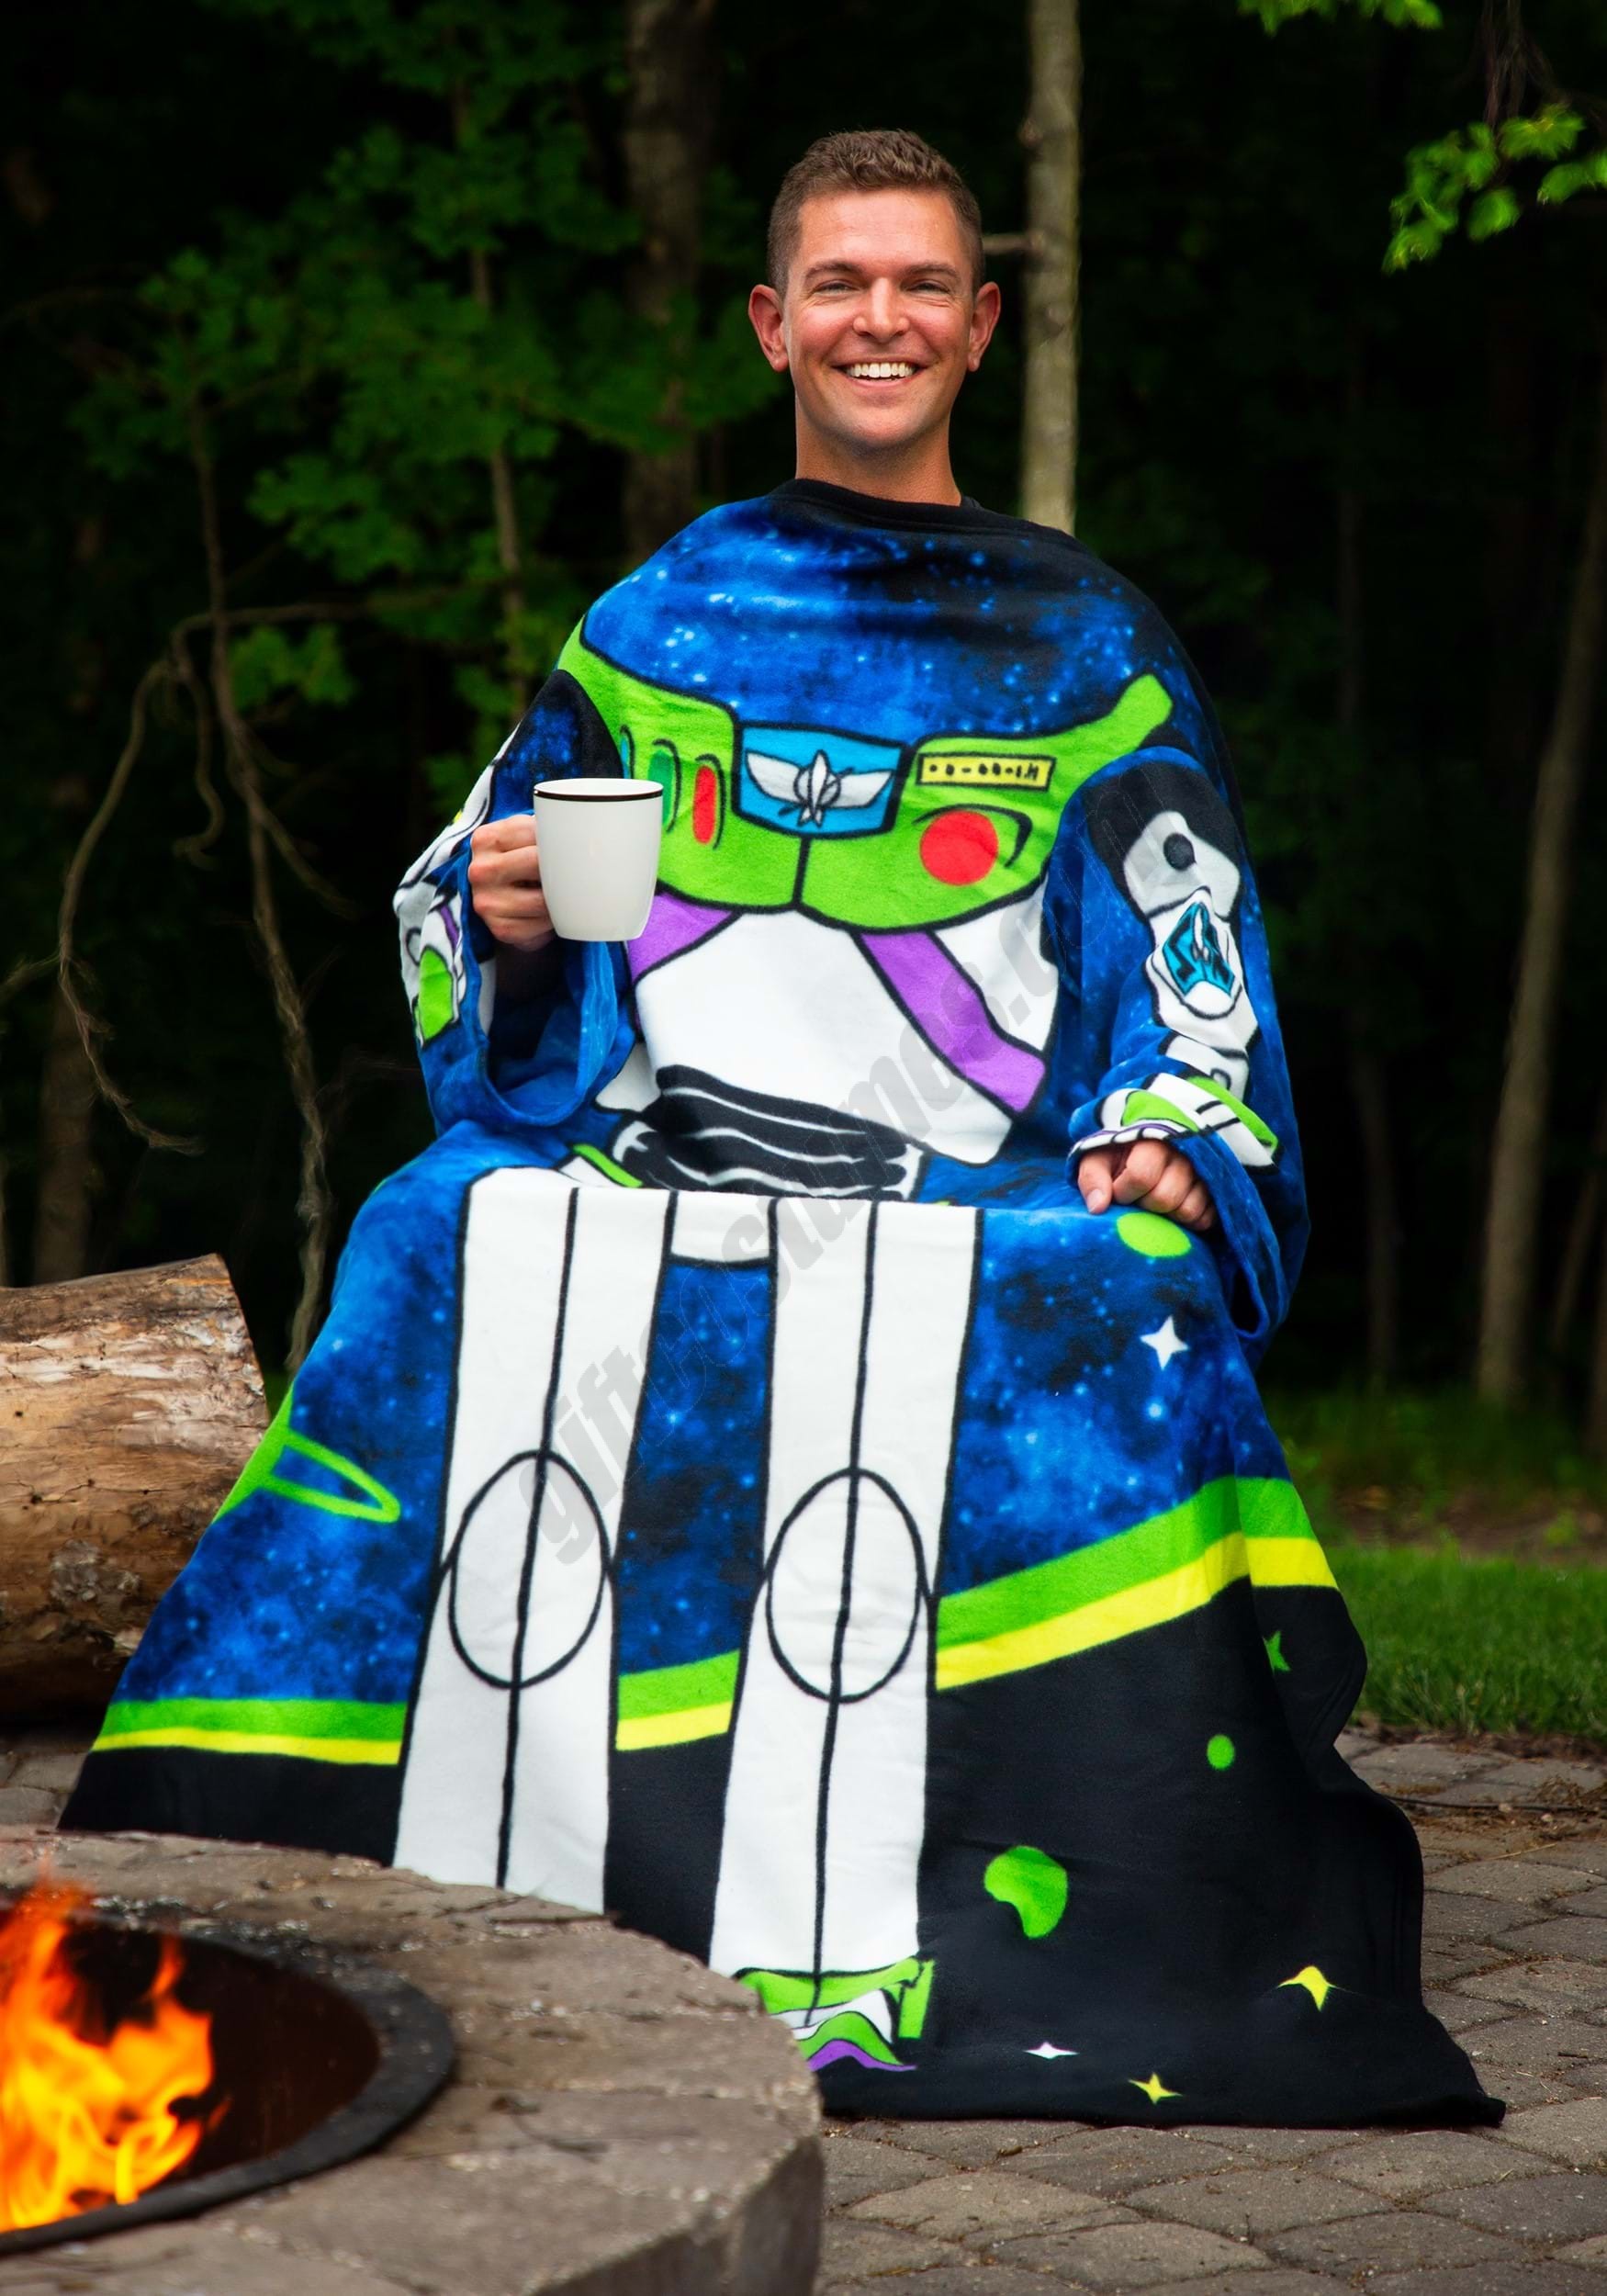 Toy Story Buzz Lightyear Comfy Throw For Adult Promotions - Toy Story Buzz Lightyear Comfy Throw For Adult Promotions